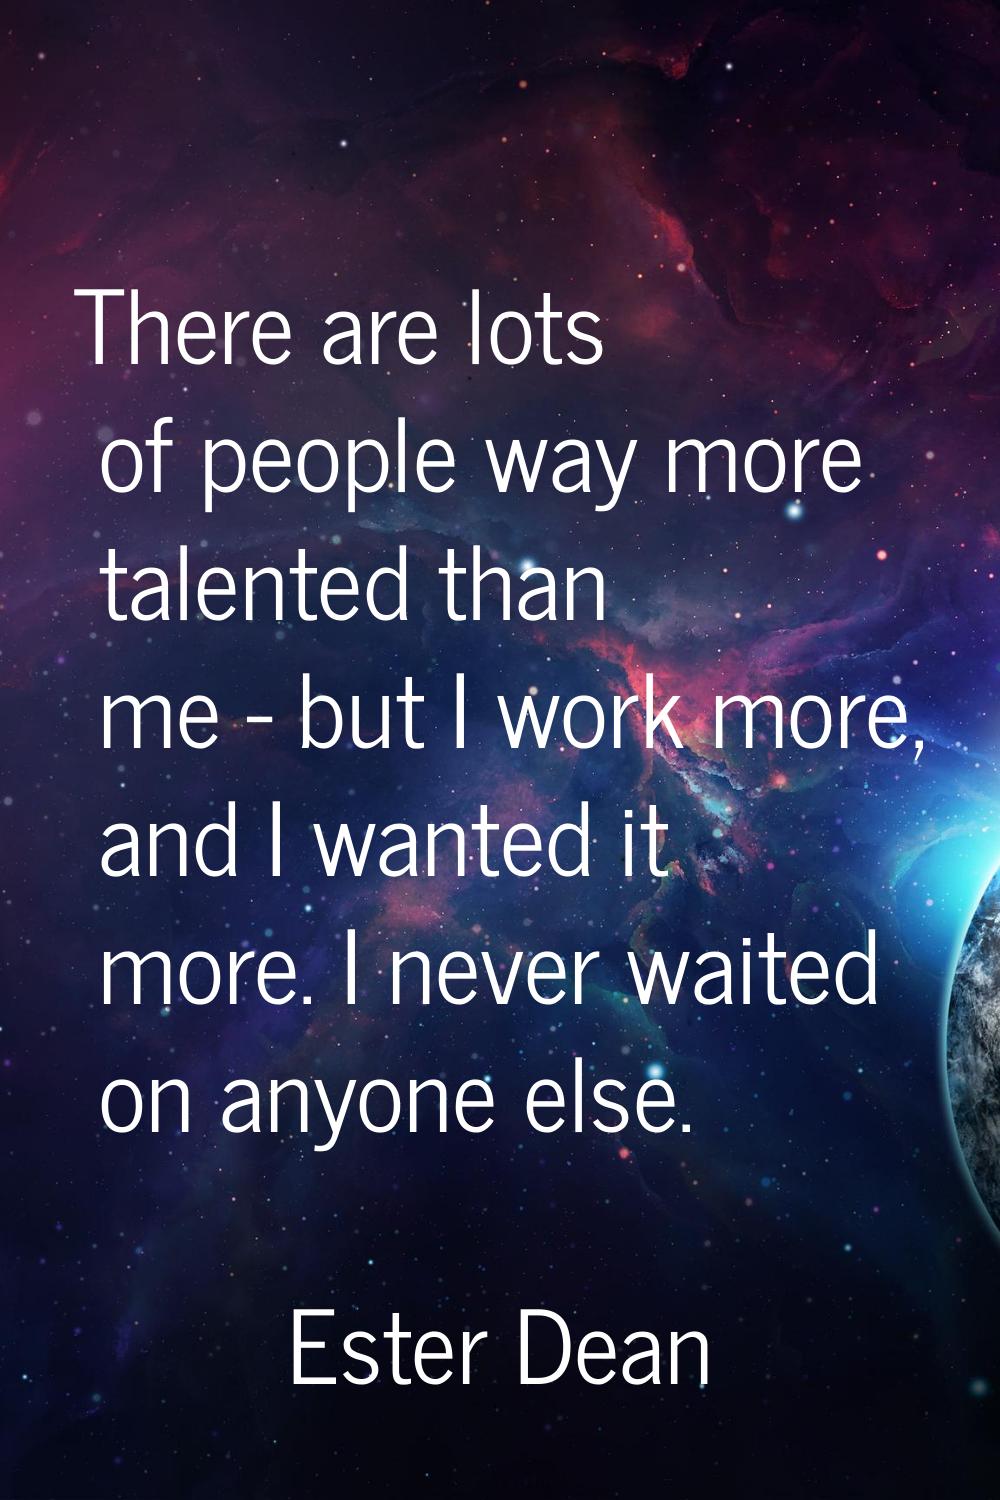 There are lots of people way more talented than me - but I work more, and I wanted it more. I never